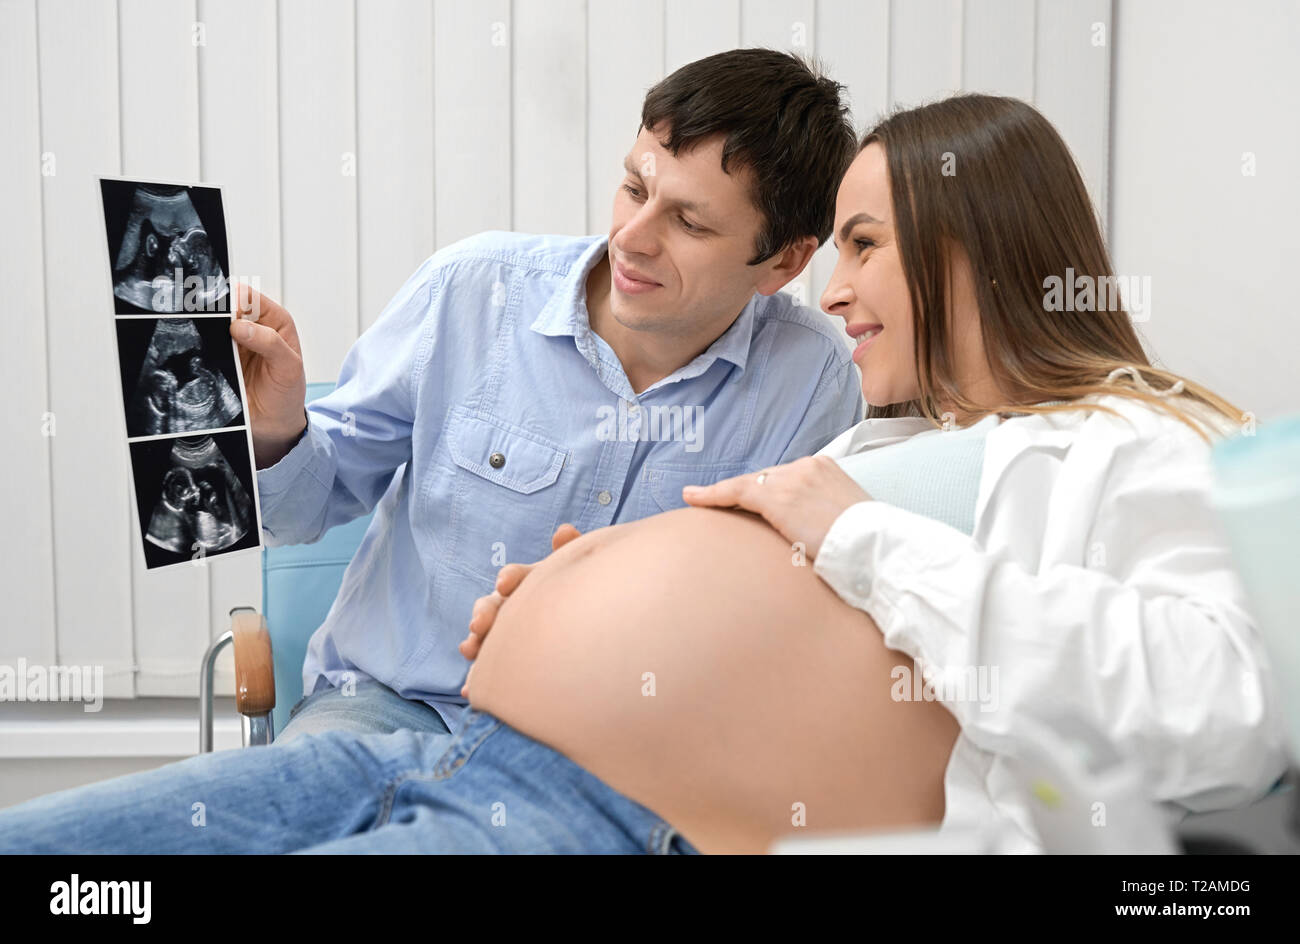 Side view of happy future mother and father sitting in clinic and looking at ultrasound image of baby photo